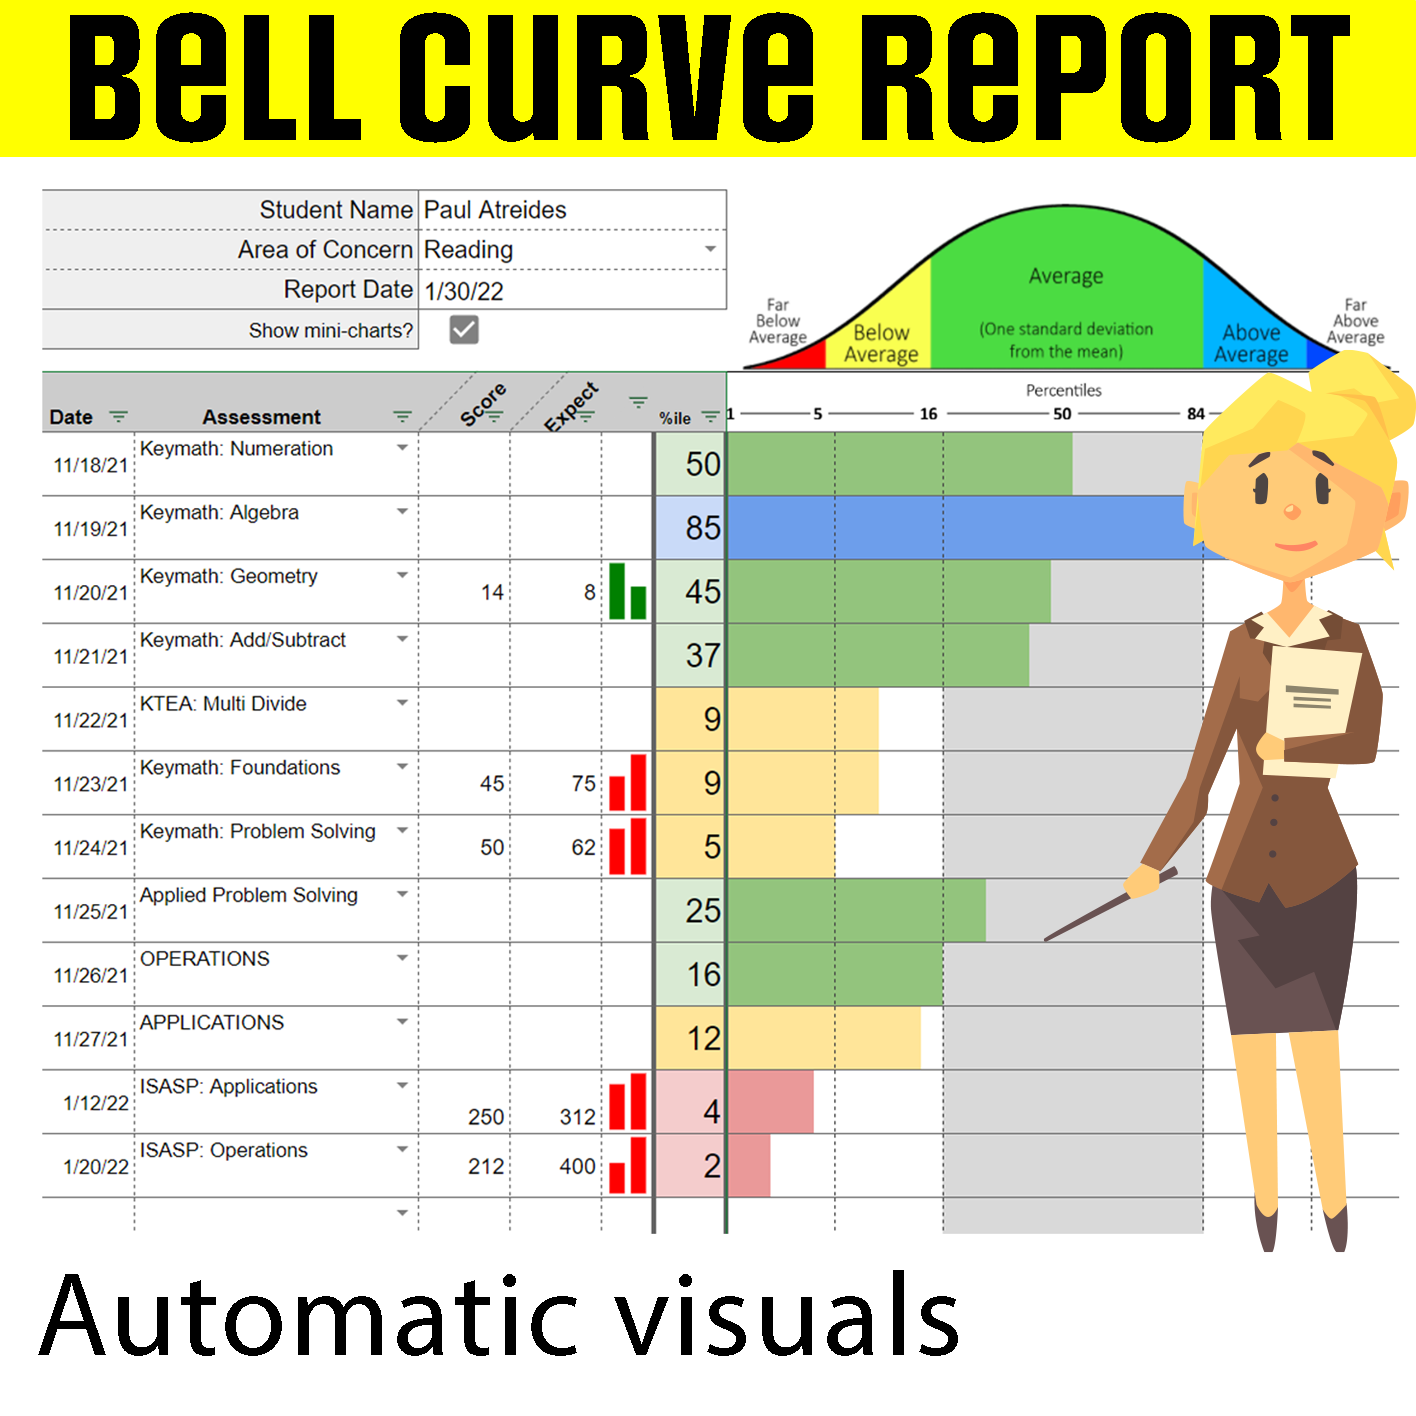 Bell Curve Visual Report (Interactive and Automated) Compare assessments to norms